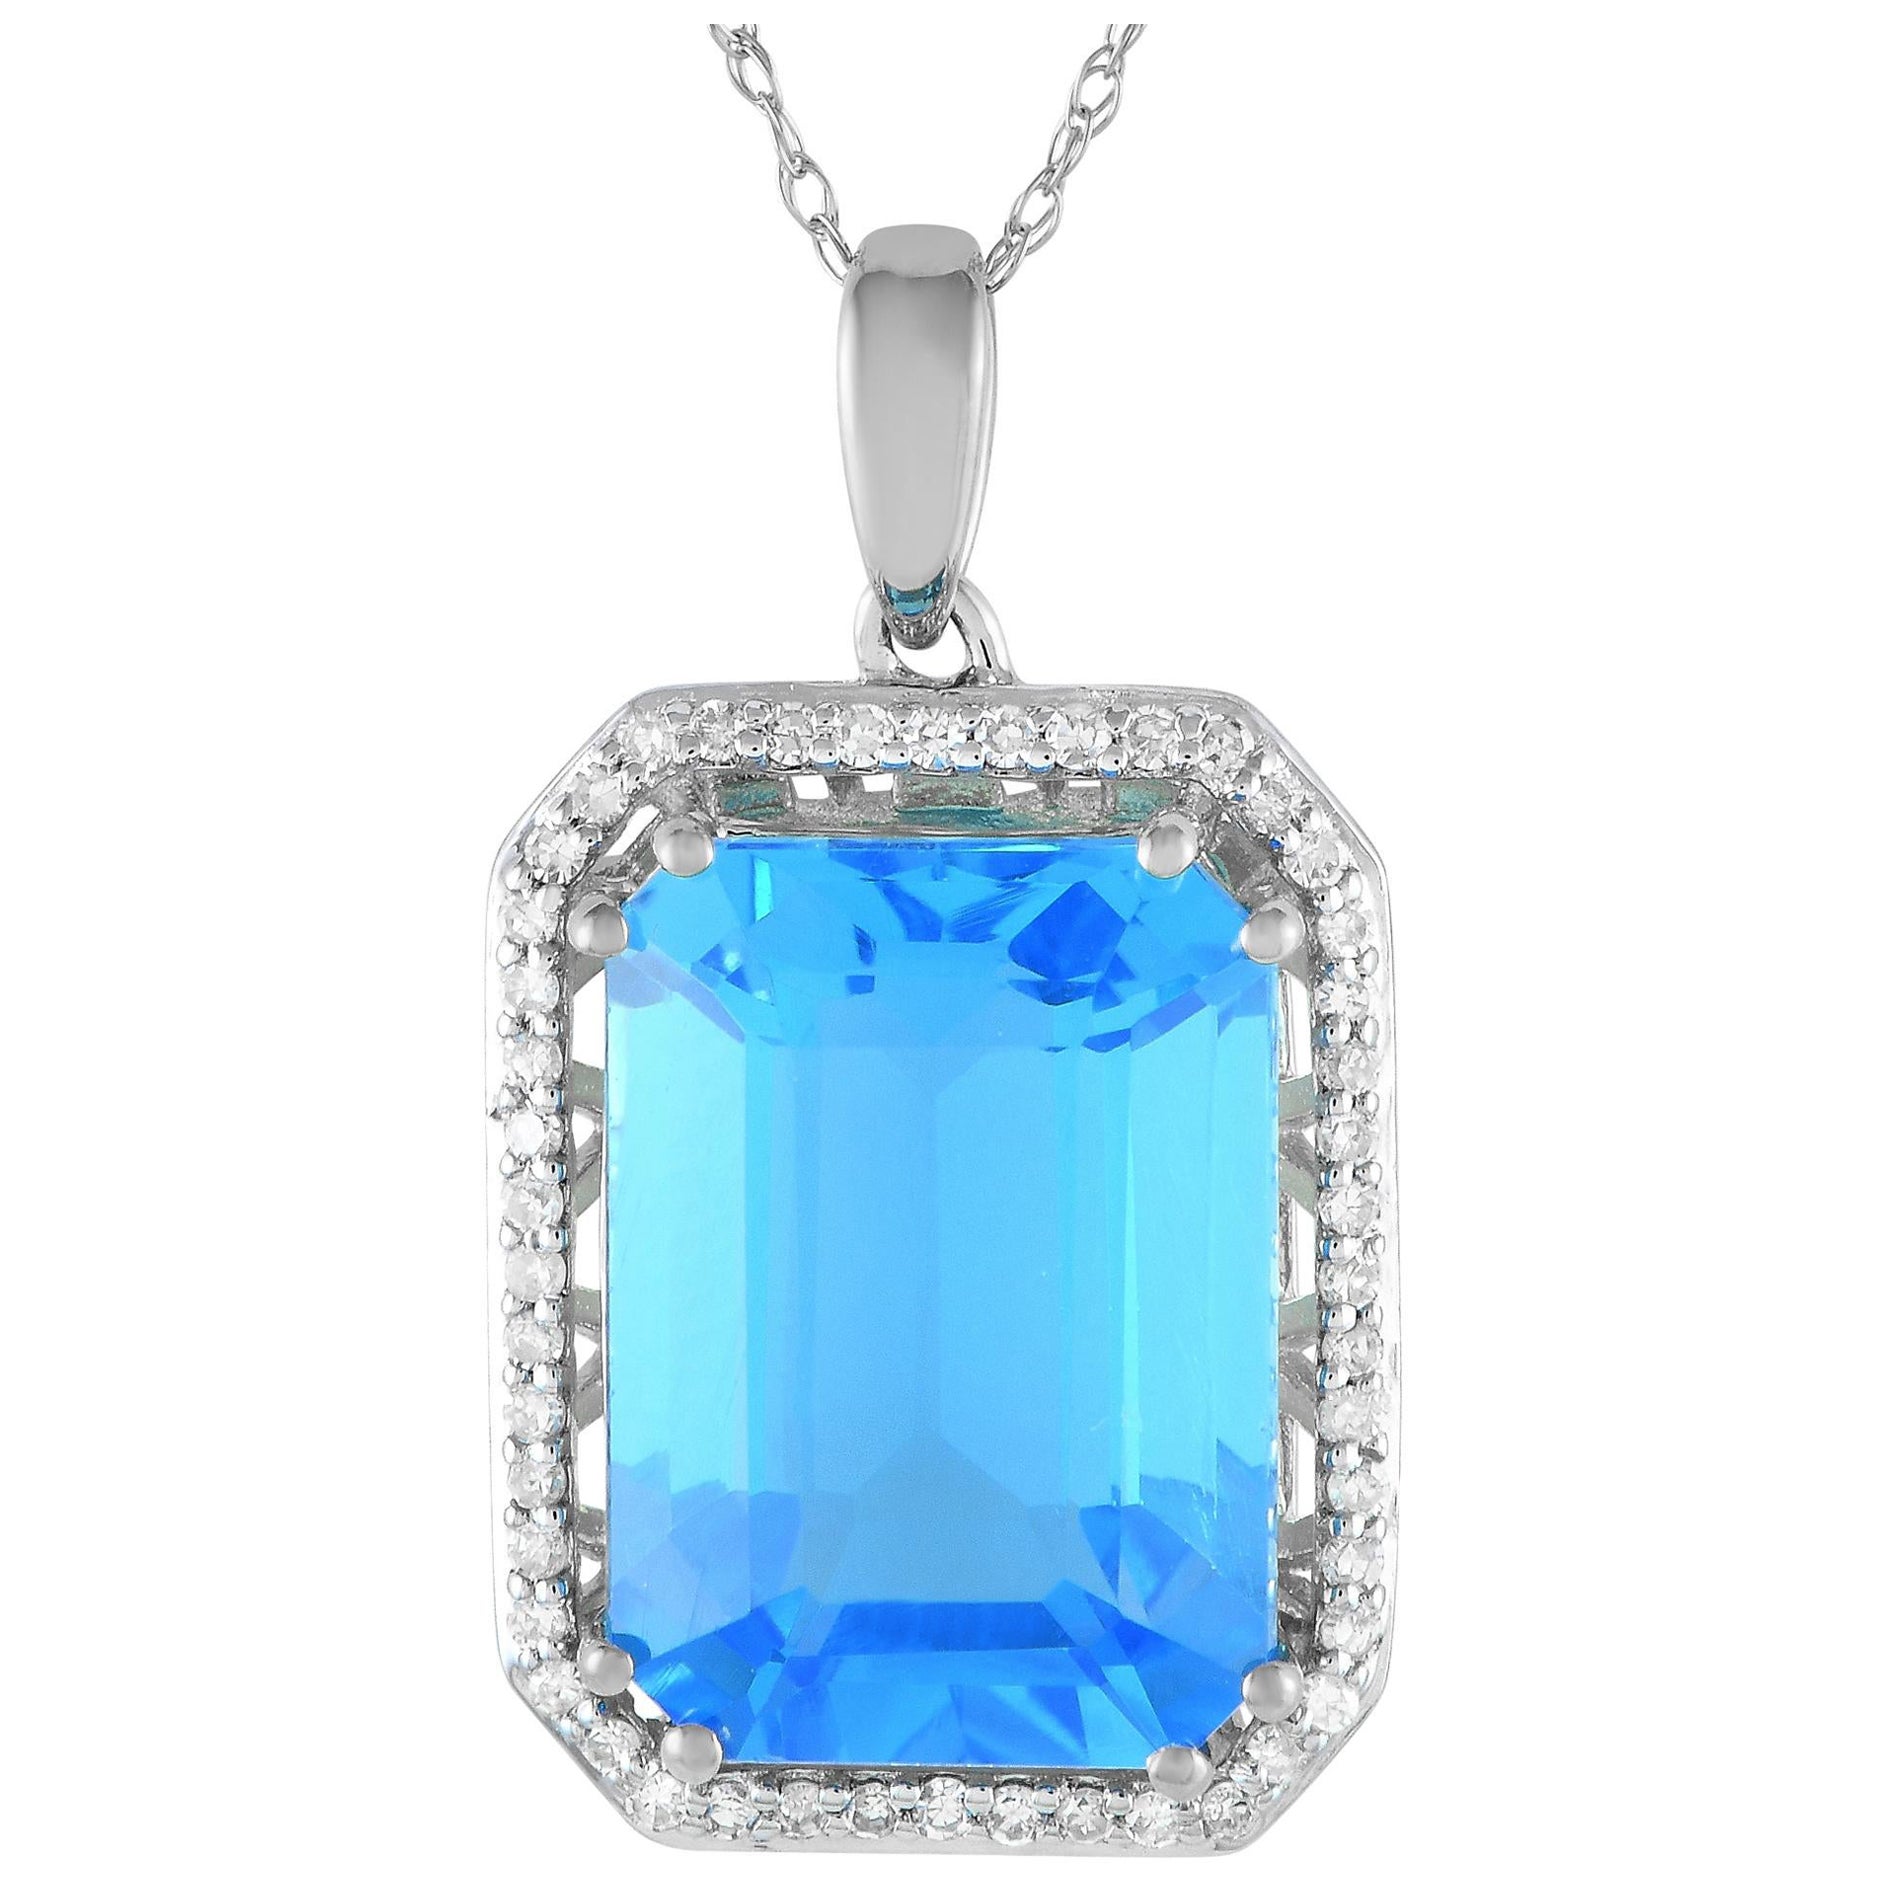 LB Exclusive 14K White Gold 0.20ct Diamond and Blue Topaz Necklace PD4-15513WBT